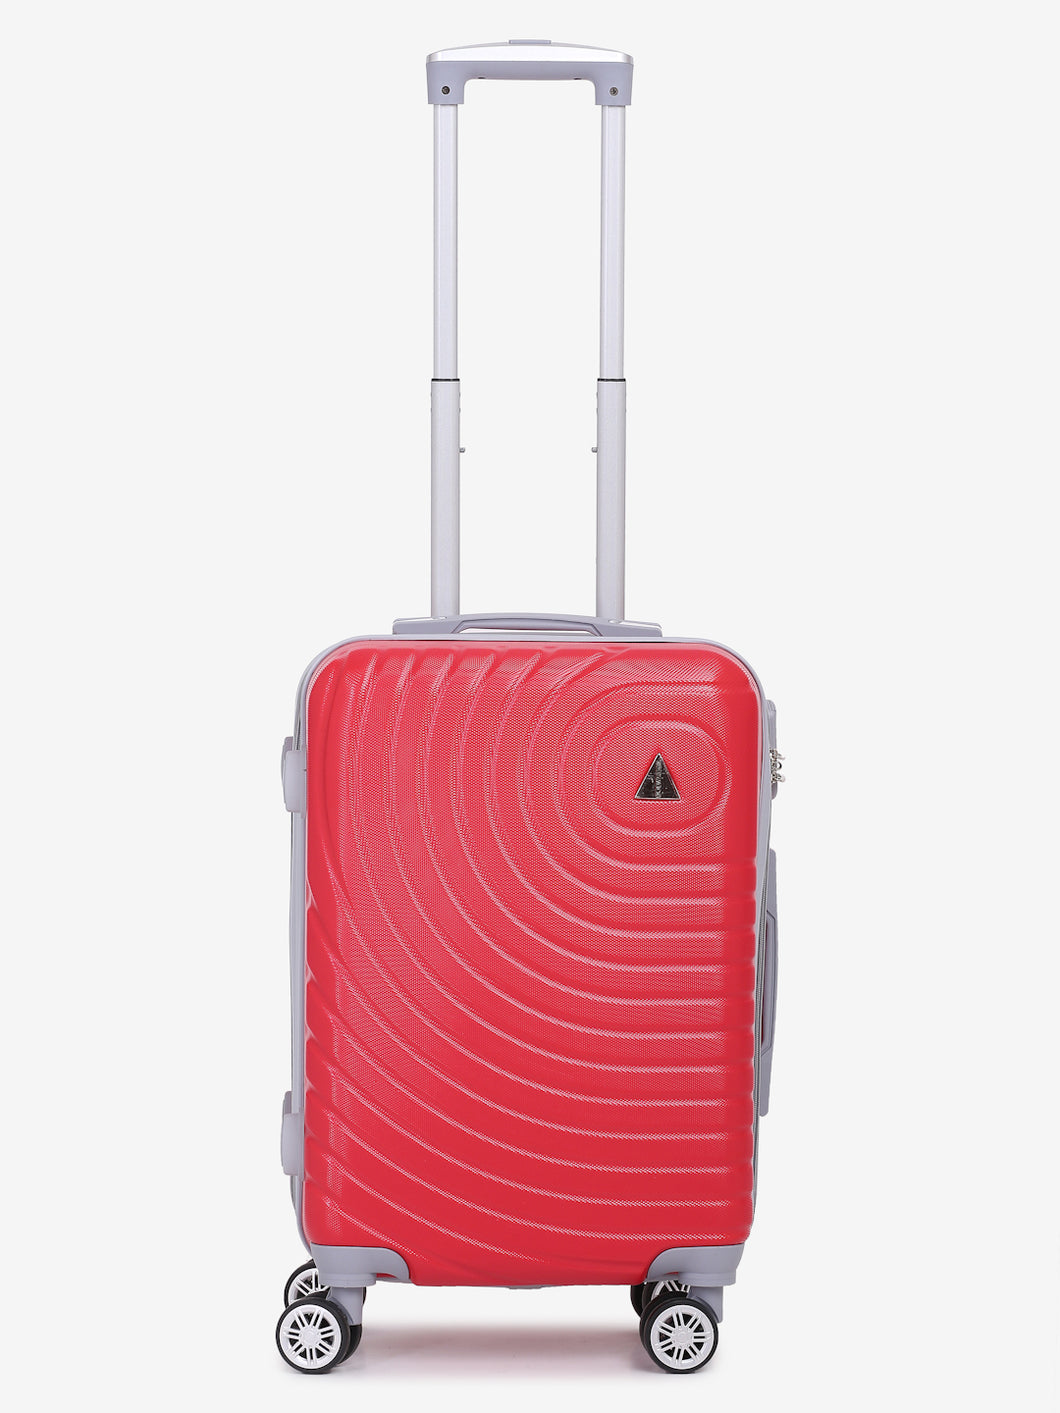 Unisex Red Textured Hard-Sided Cabin Trolley Suitcase